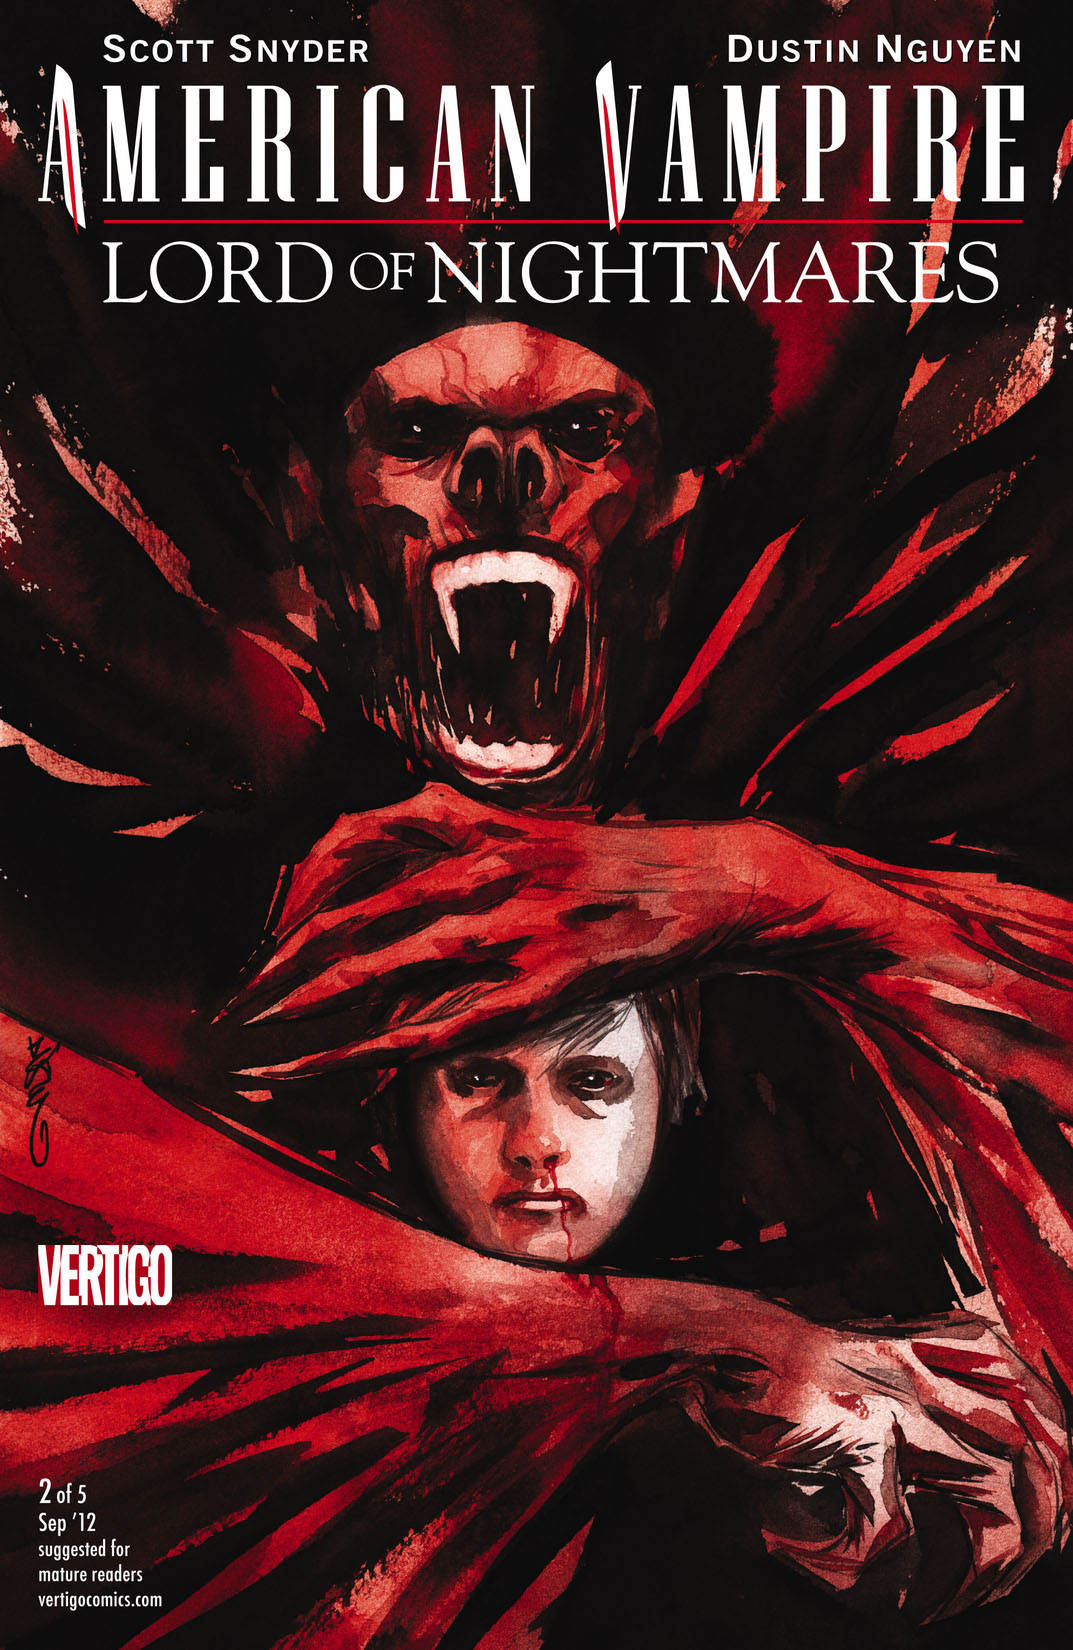 American Vampire: Lord of Nightmares #2 preview images